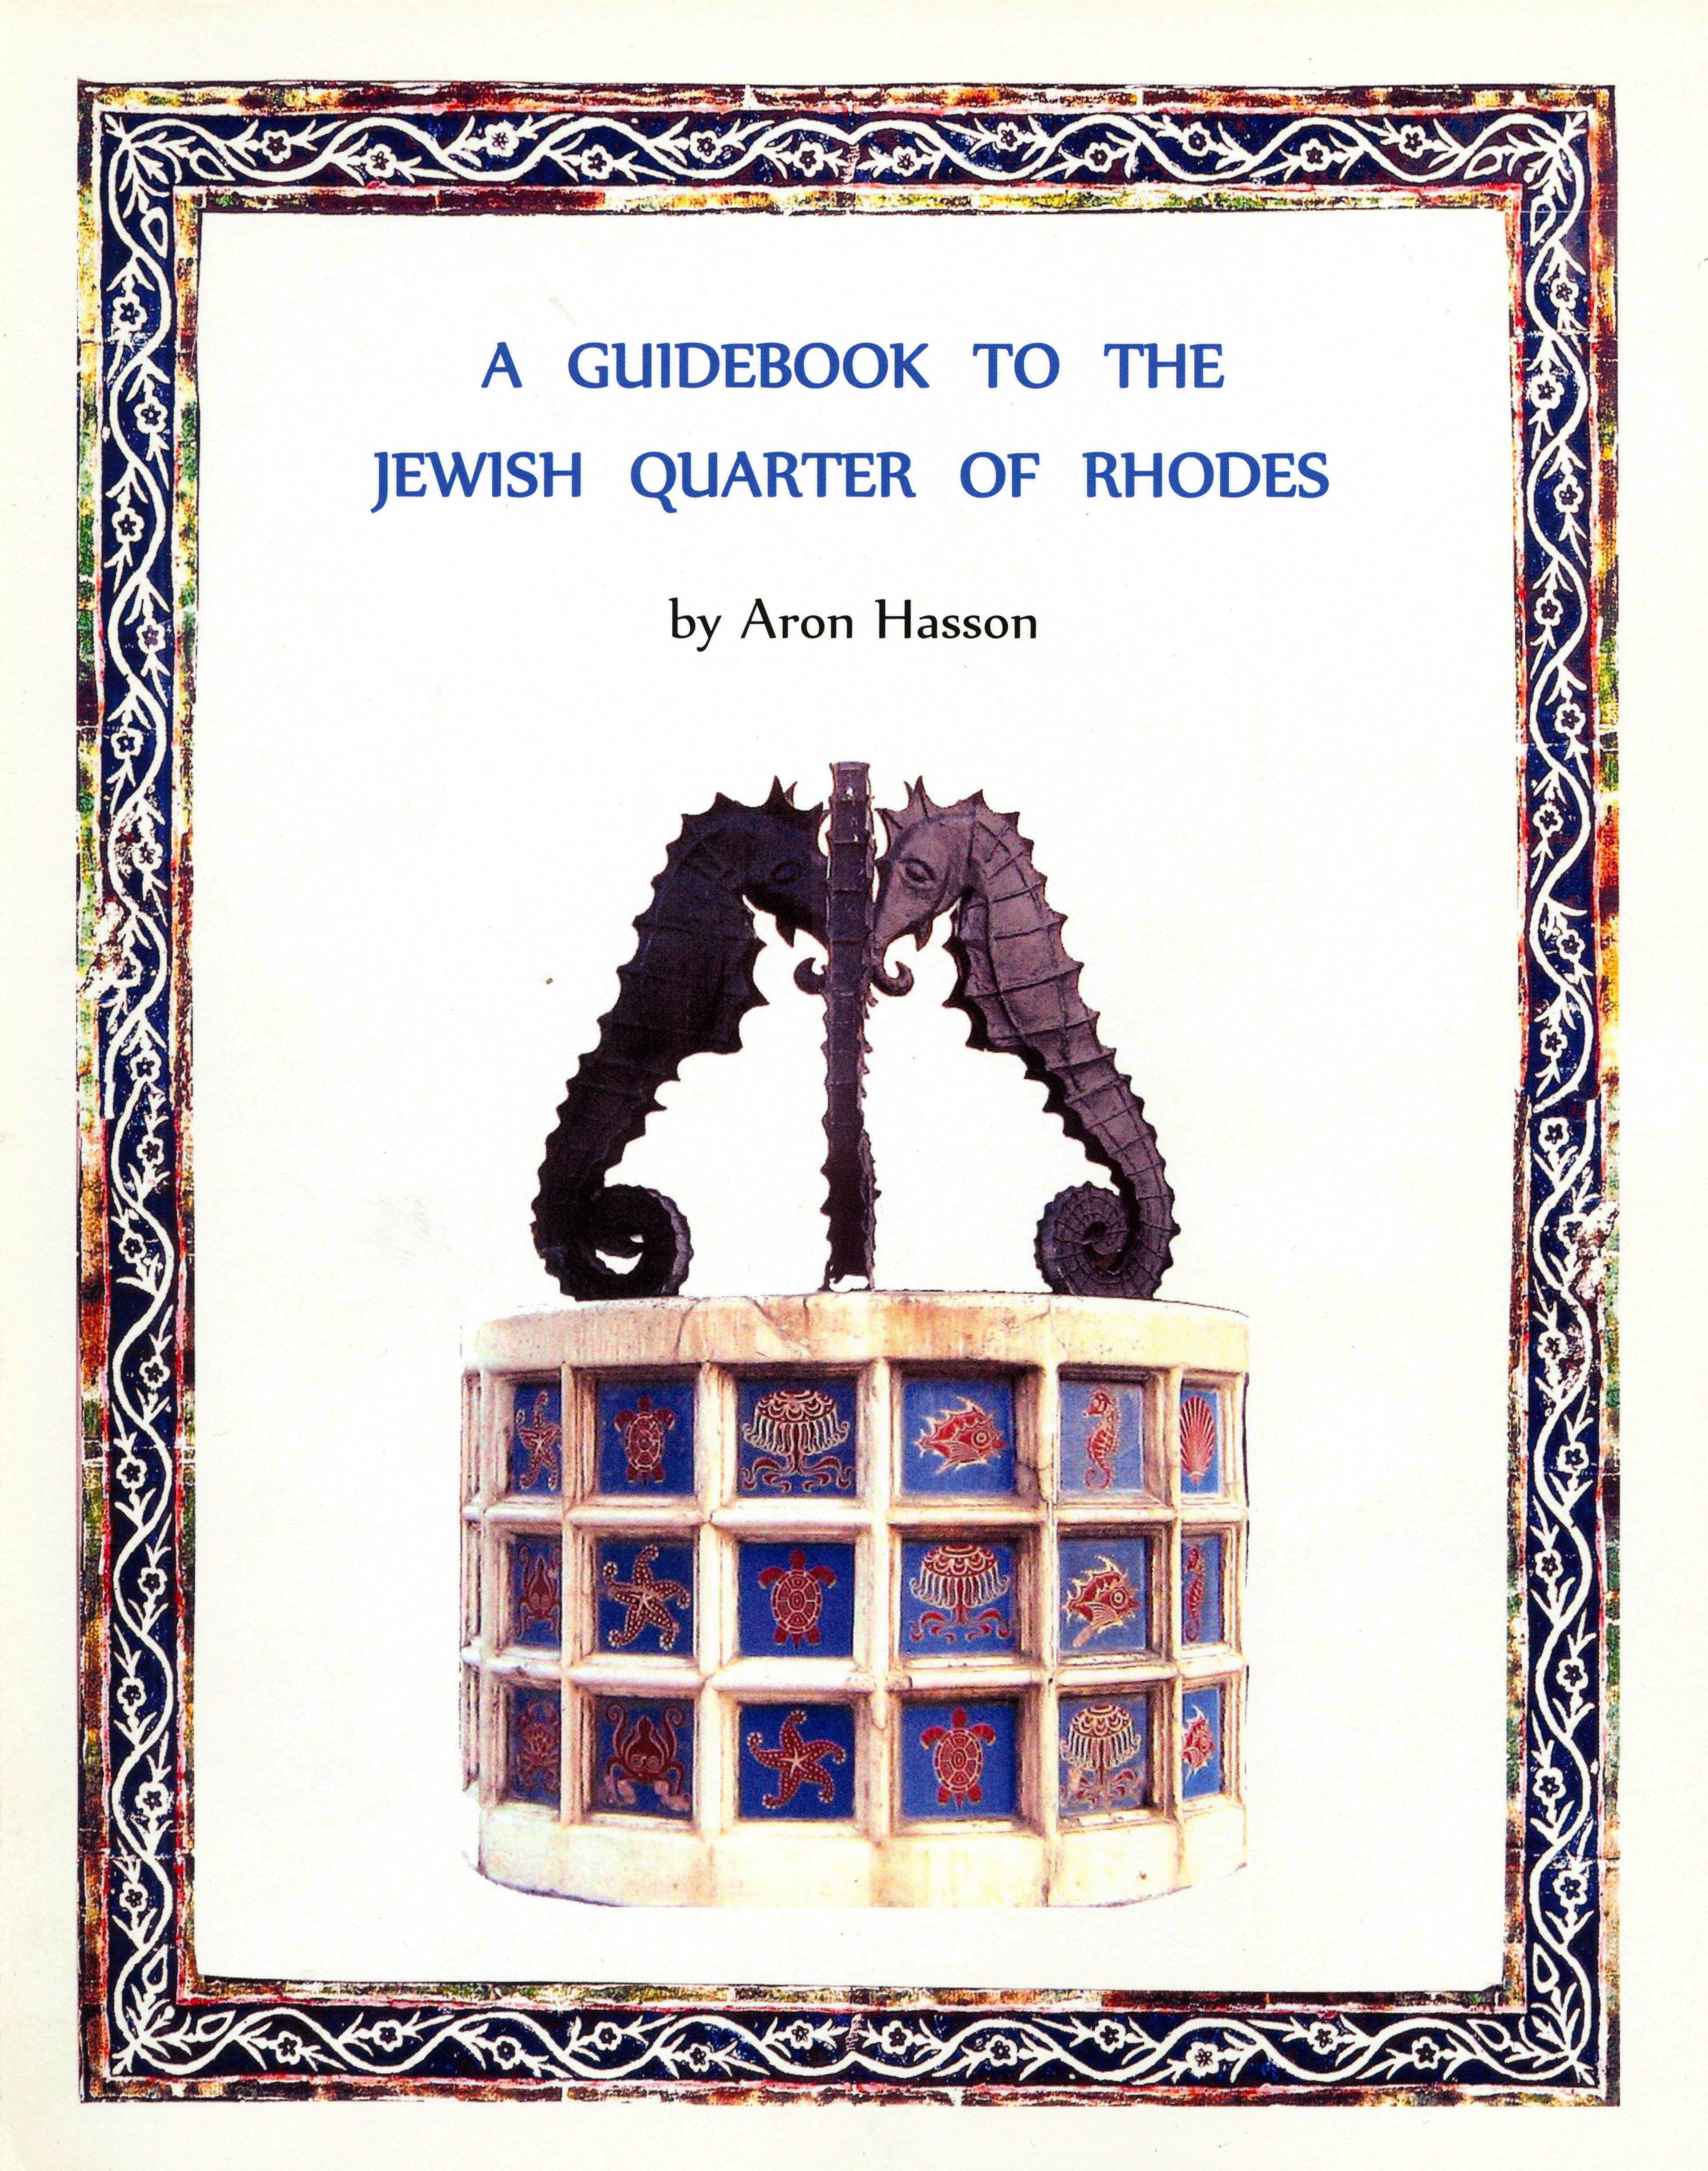 A Guidebook to the Jewish Quarter of Rhodes